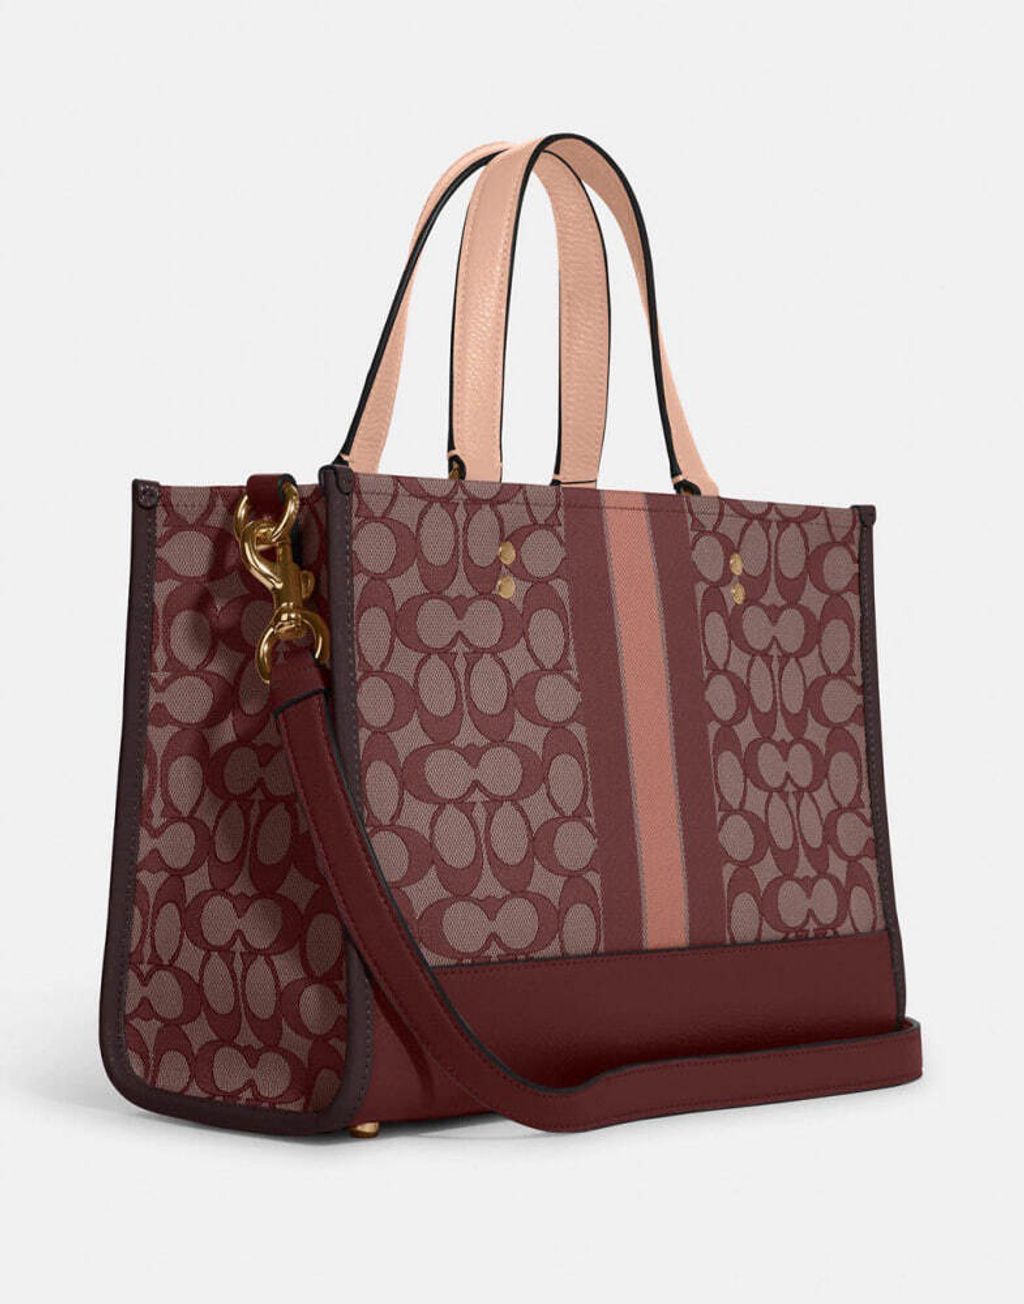 handbagbranded.com getlush outlet personalshopper usa malaysia ready stock COACH DEMPSEY CARRYALL IN SIGNATURE JACQUARD 2